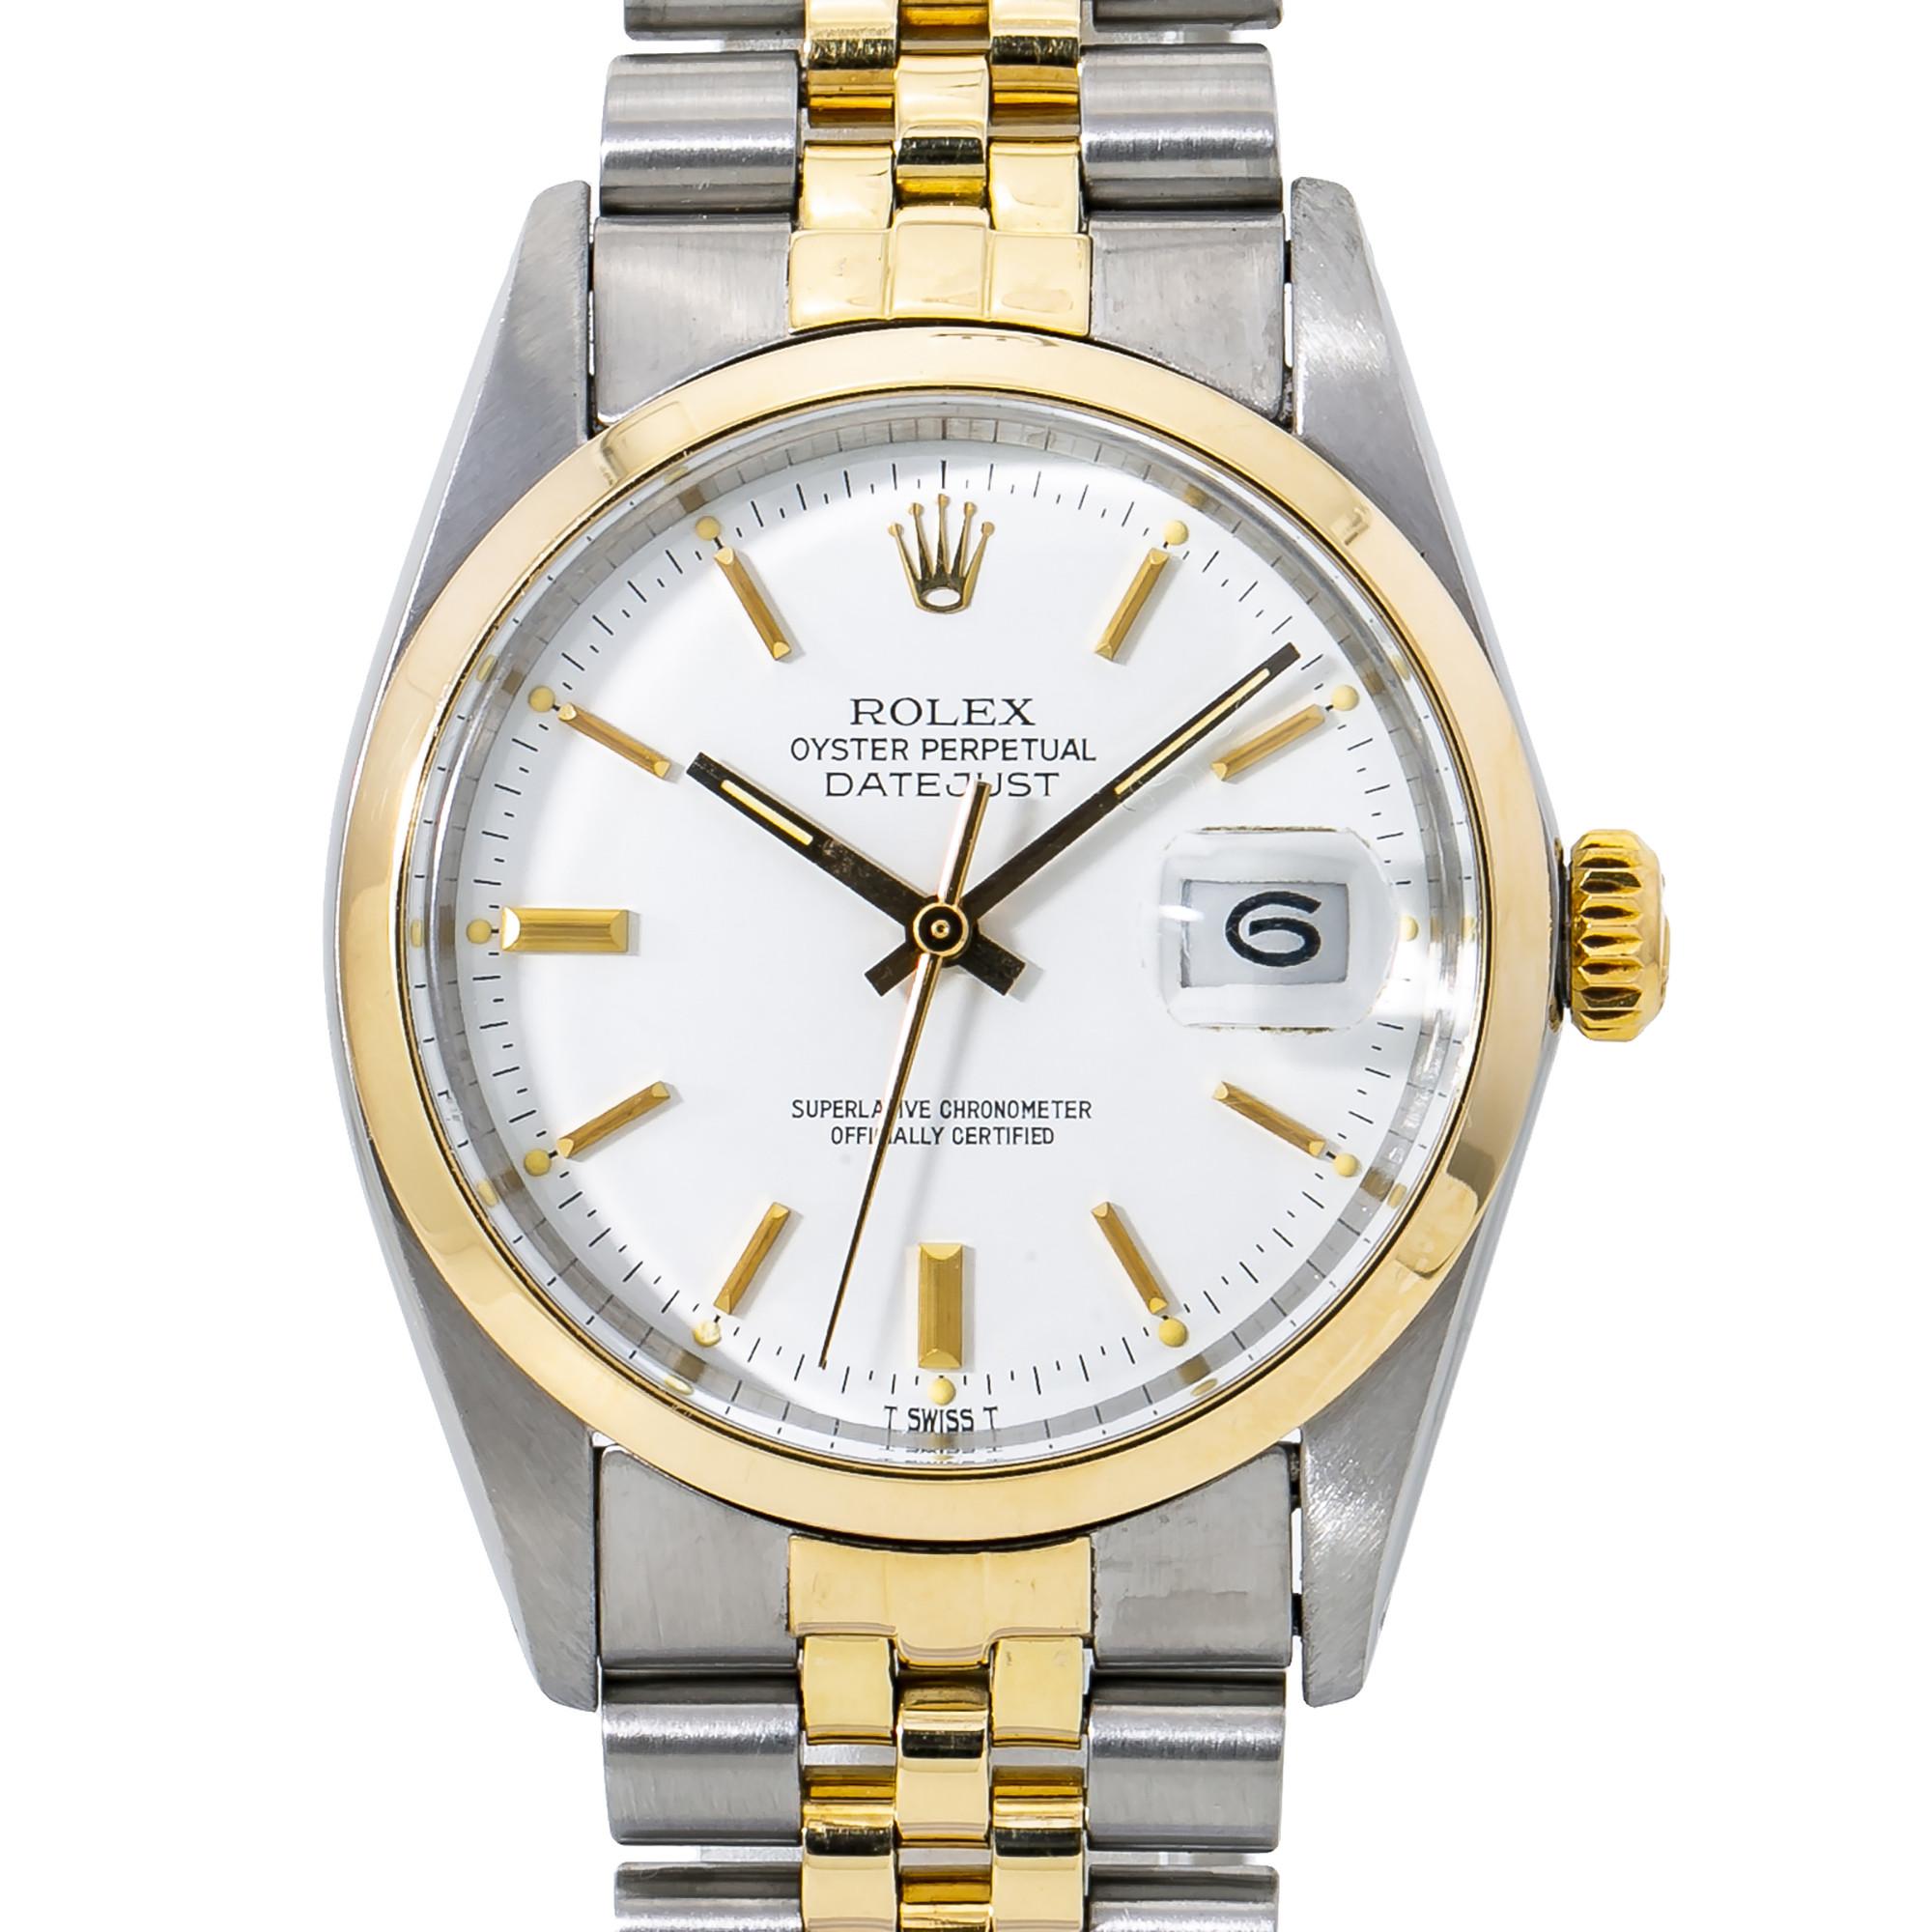 Rolex Datejust 16003 Vintage Rare White Men's Automatic Watch Two-Tone In Excellent Condition For Sale In Miami, FL